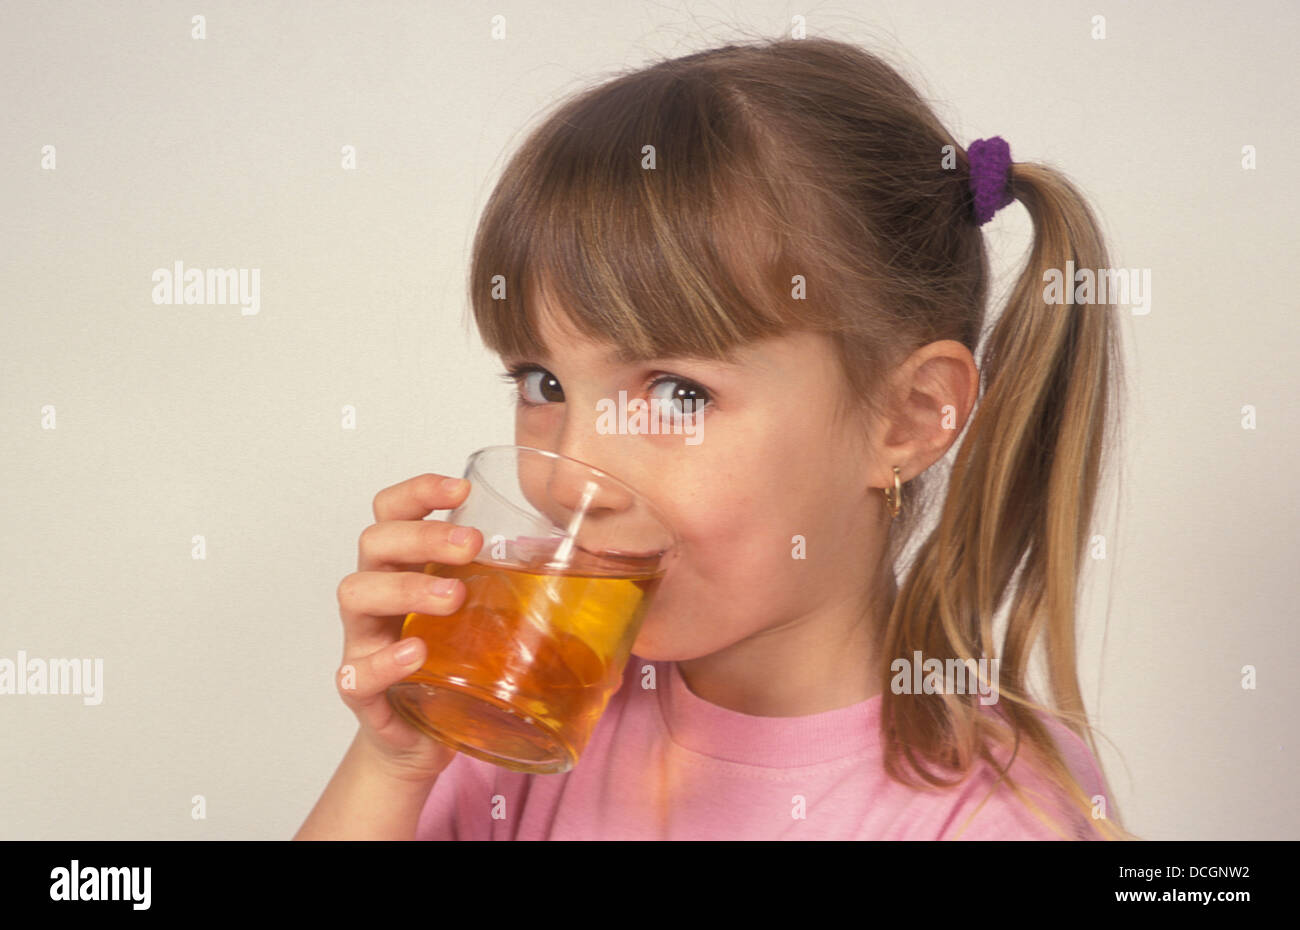 young-girl-drinking-apple-juice-DCGNW2.jpg